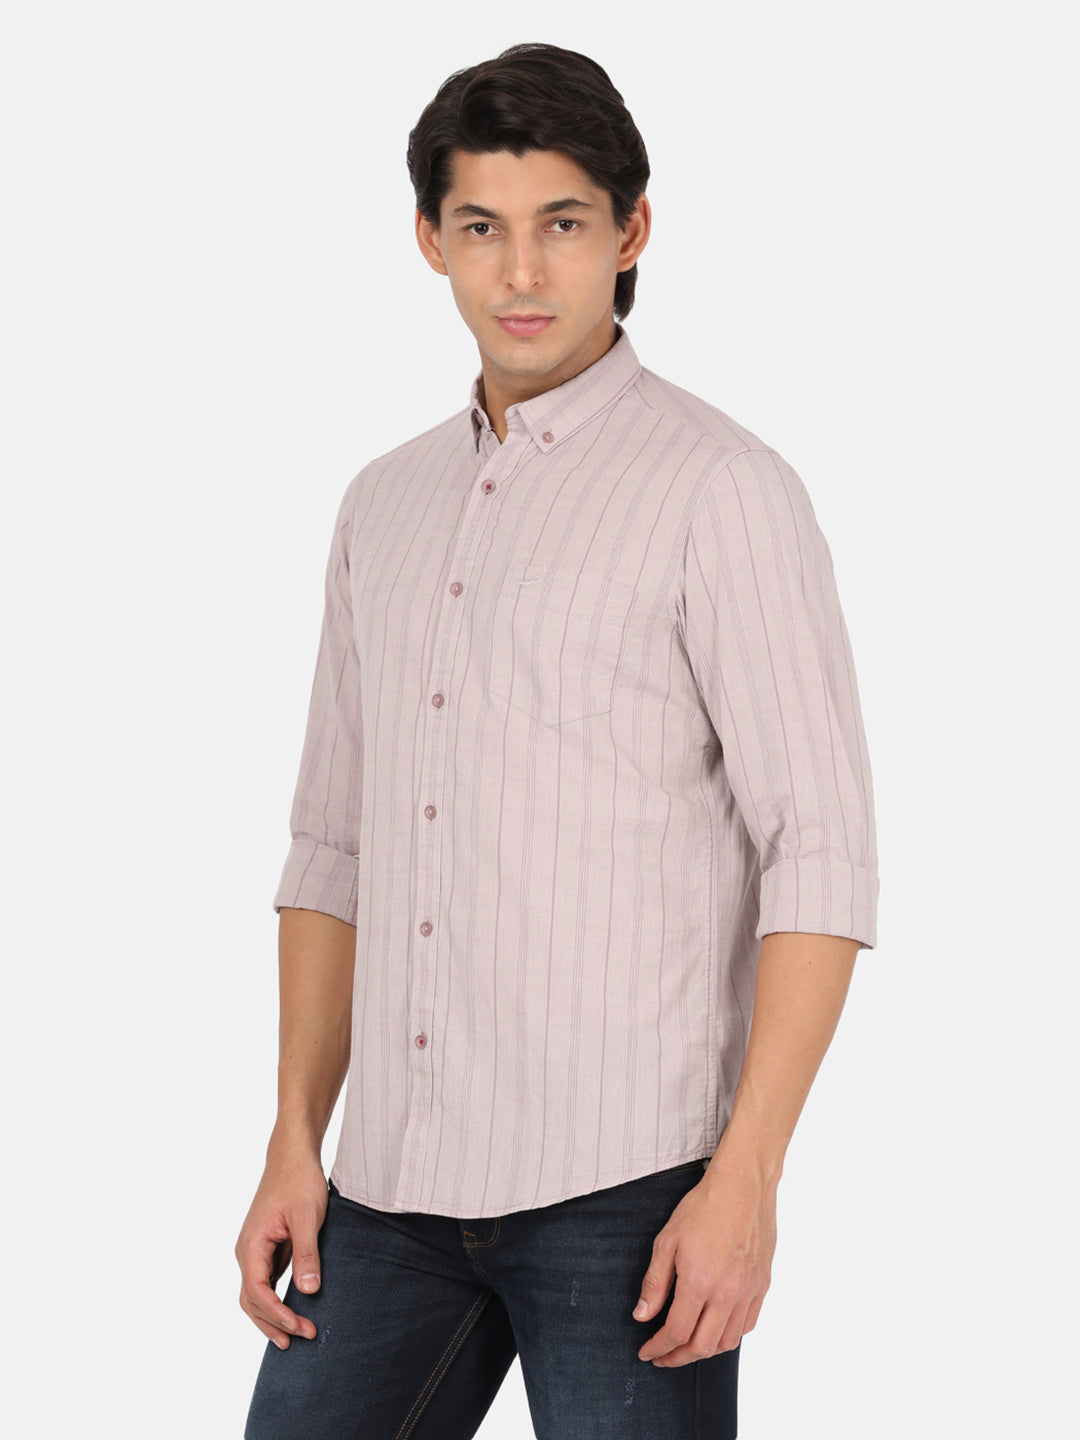 Crocodile Casual Full Sleeve Comfort Fit Stripes Purple with Collar Shirt for Men